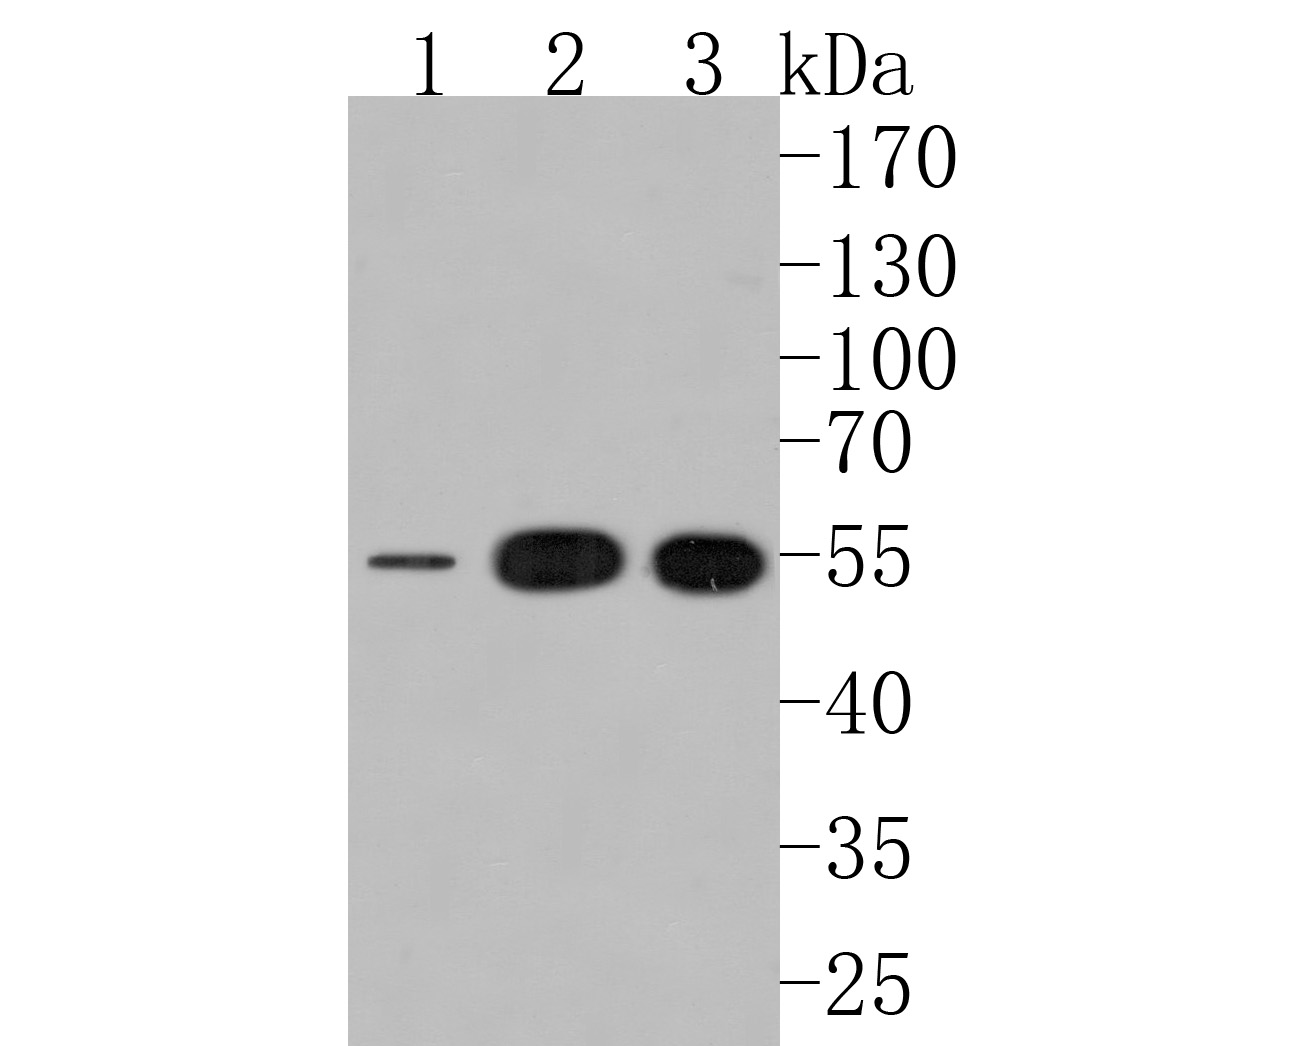 Western blot analysis of Adipose Triglyceride Lipase on different lysates. Proteins were transferred to a PVDF membrane and blocked with 5% NFDM/TBST for 1 hour at room temperature. The primary antibody (HA500301, 1/1,000) was used in 5% NFDM/TBST at room temperature for 2 hours. Goat Anti-Rabbit IgG - HRP Secondary Antibody (HA1001) at 1:200,000 dilution was used for 1 hour at room temperature.<br />
Positive control: <br />
Lane 1: 293 cell lysate<br />
Lane 2: HepG2 cell lysate<br />
Lane 3: A431 cell lysate